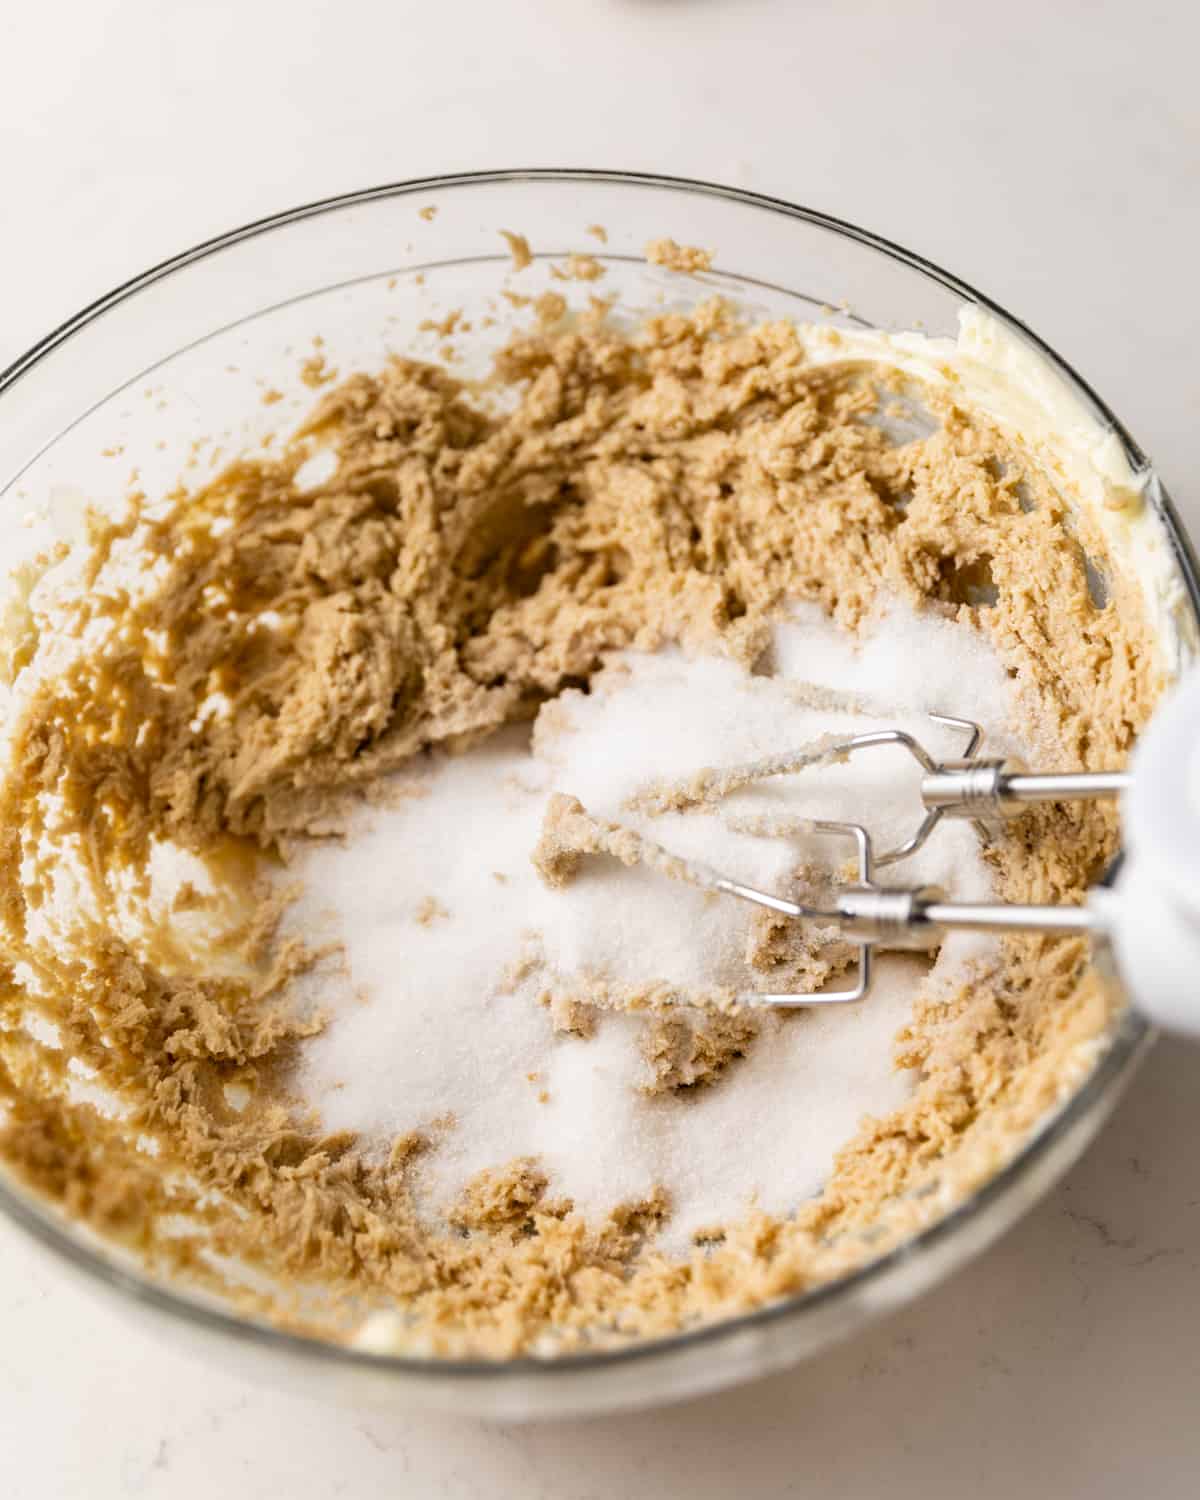 butter, sugar, and brown sugar in a large mixing bowl.